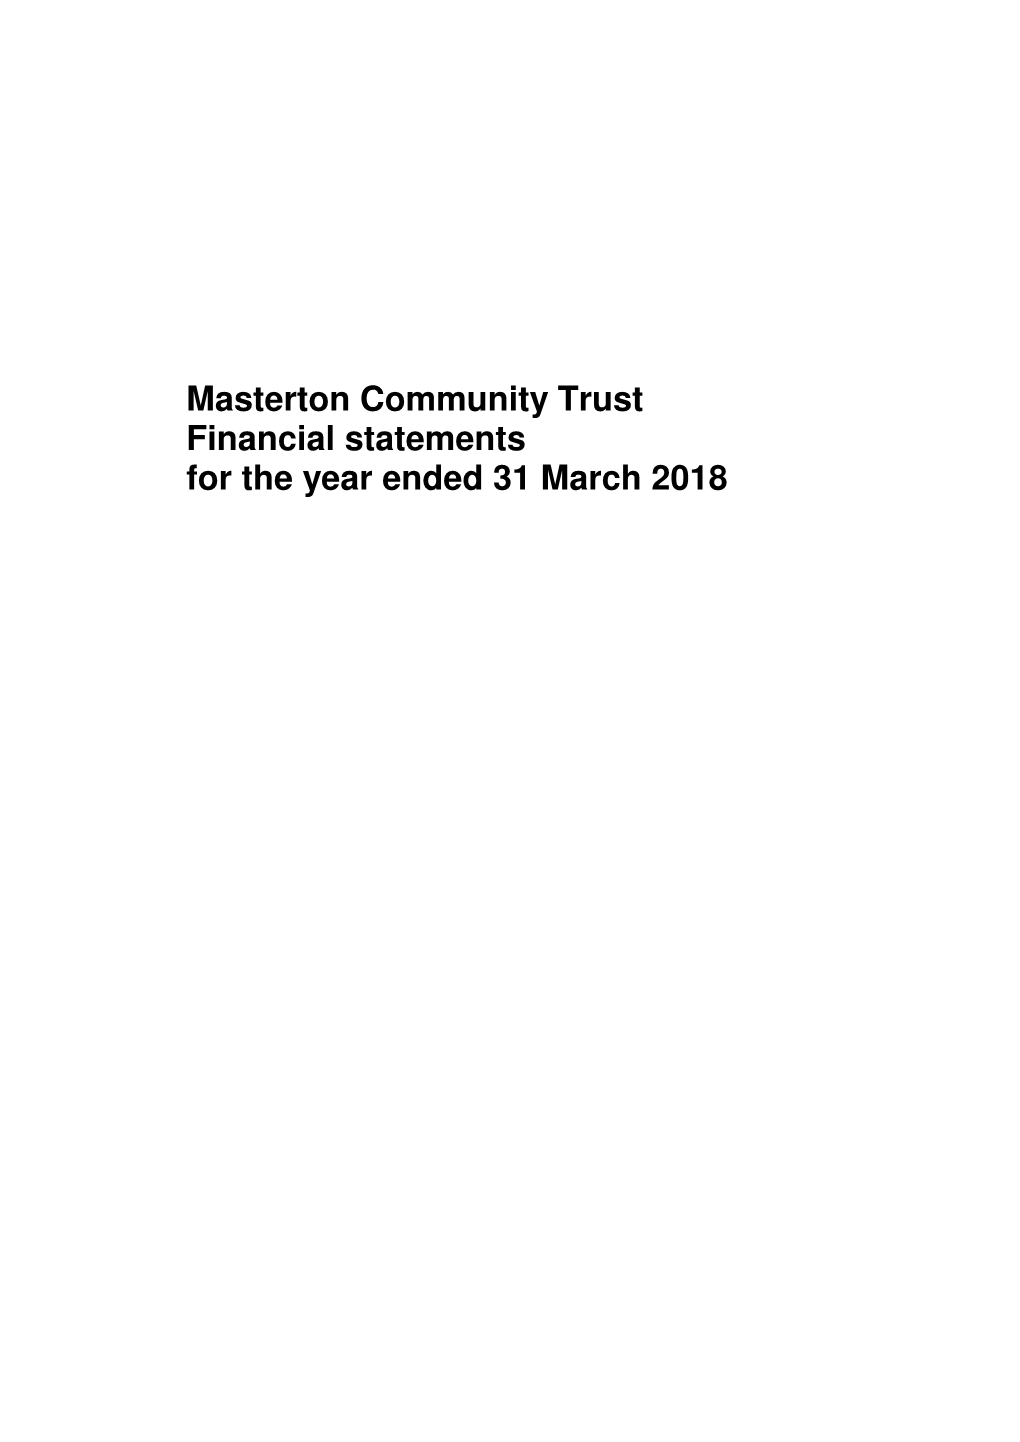 Masterton Community Trust Financial Statements for the Year Ended 31 March 2018 Contents